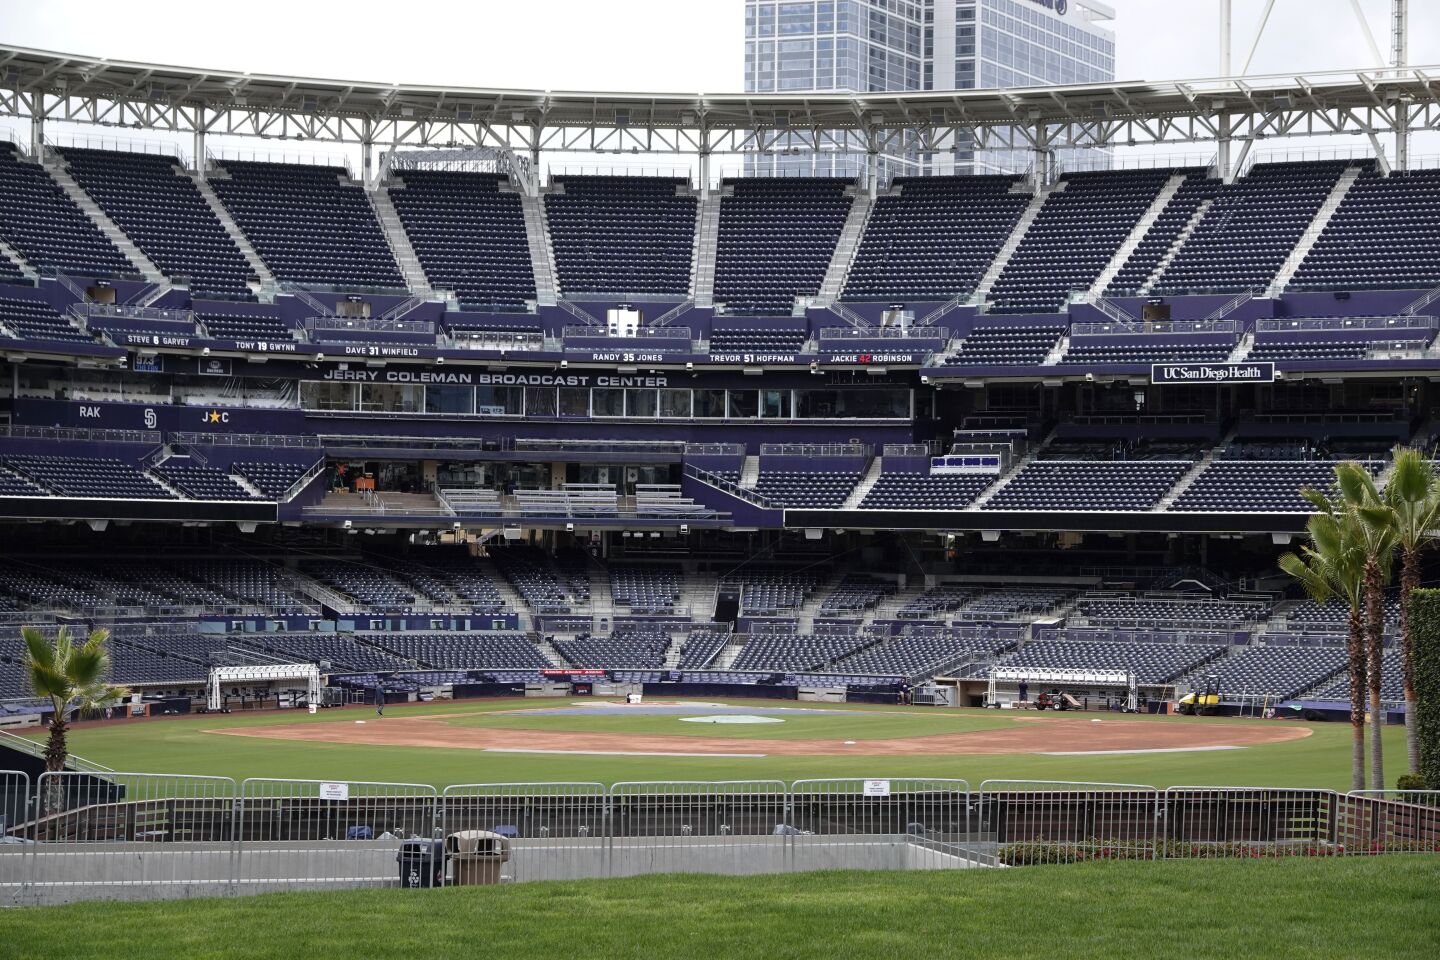 The Padres were supposed to have opening day on Thursday, but has been postponed due to the coronavirus outbreak, shown here on March 23, 2020.